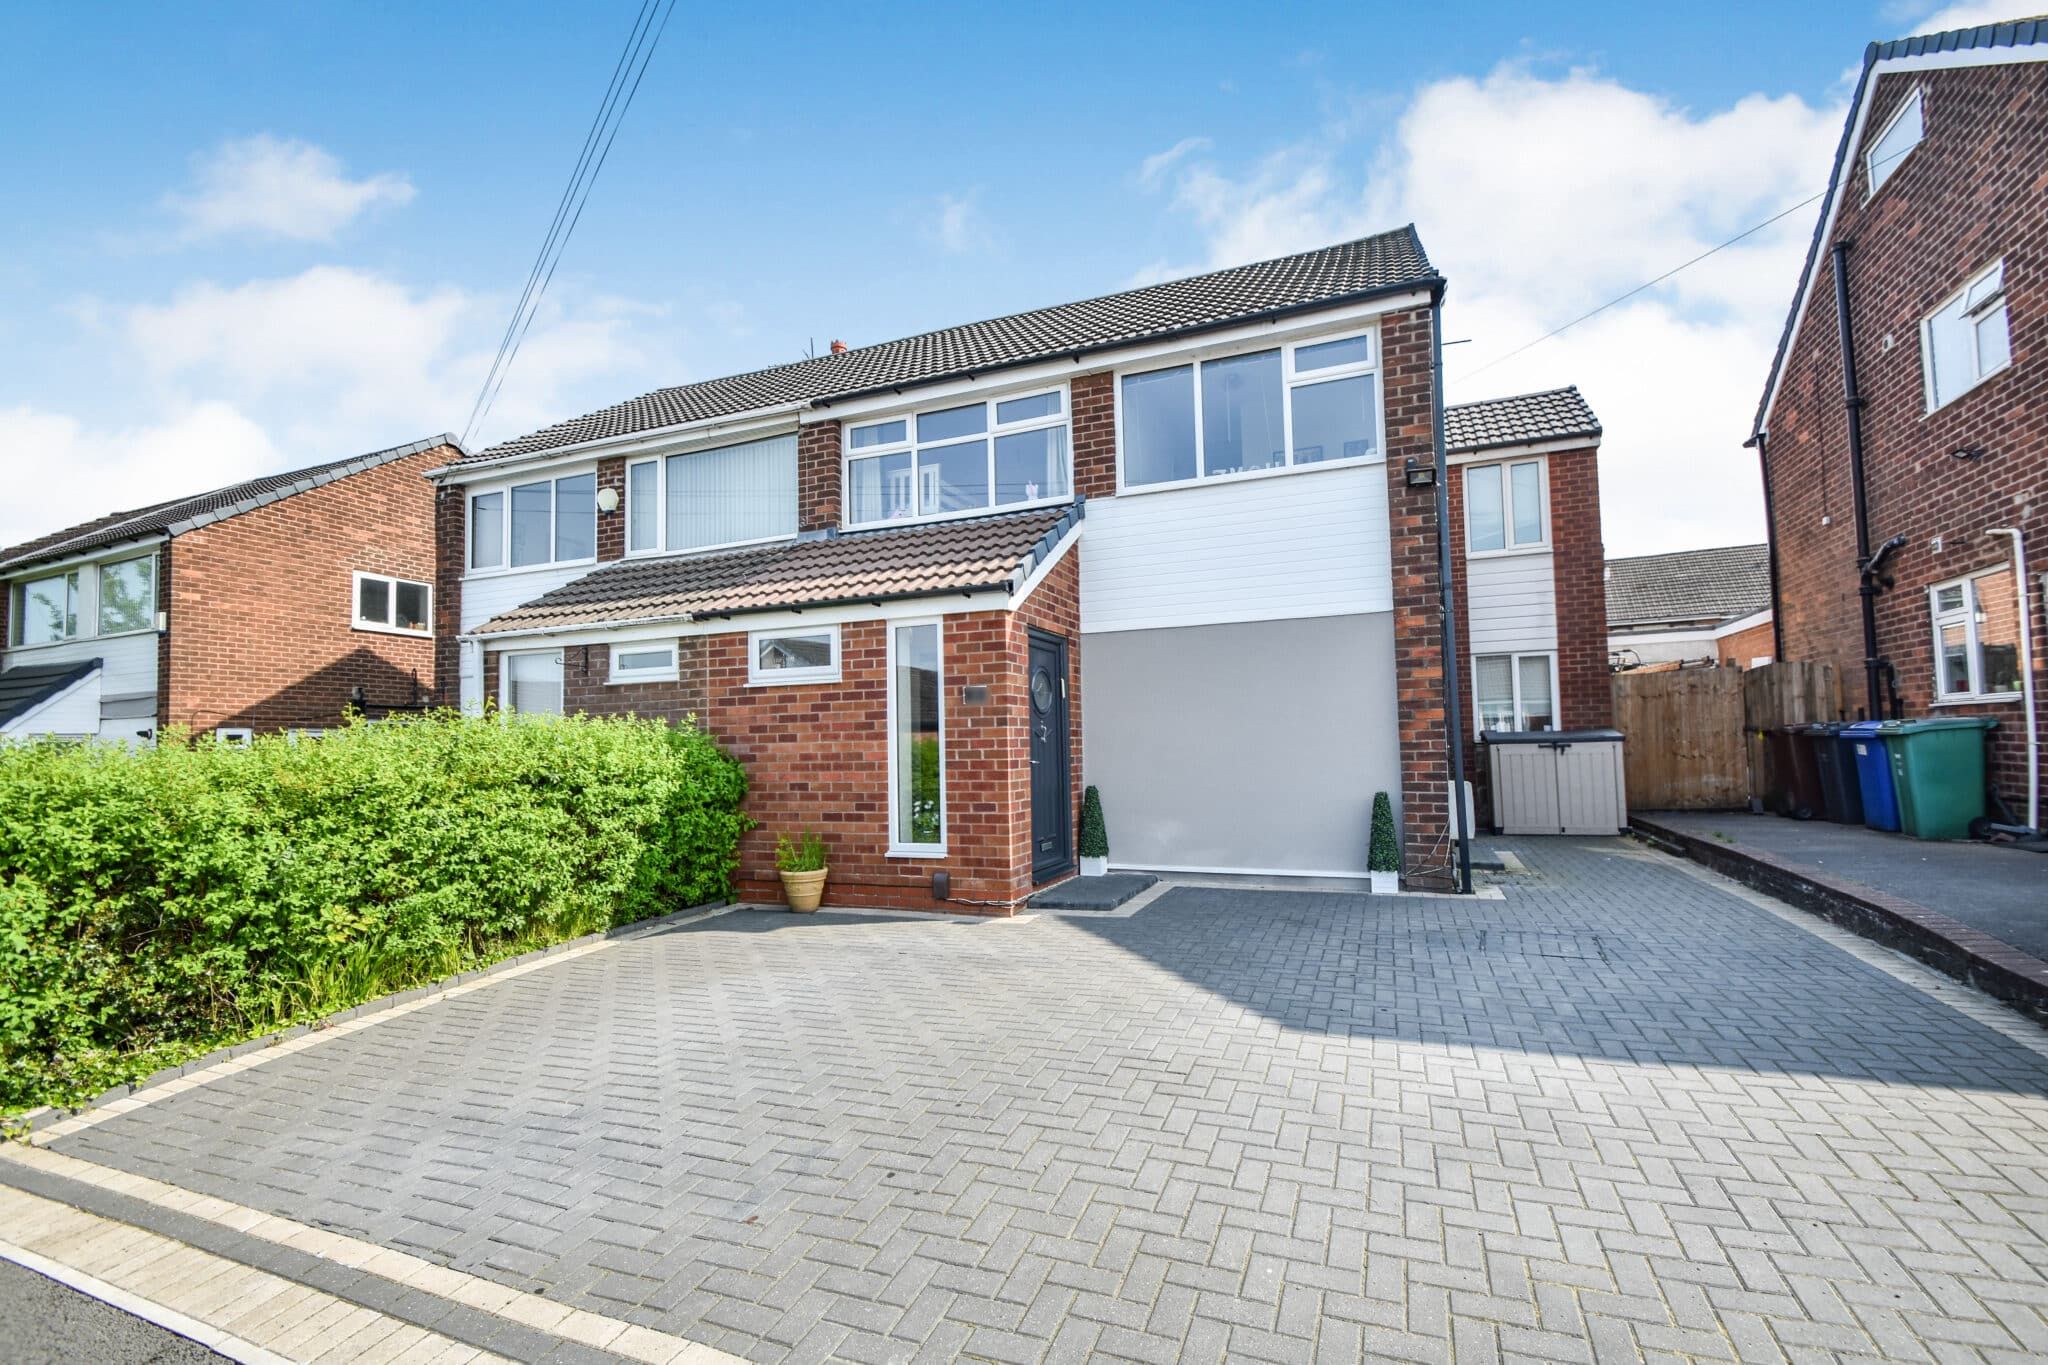 Parkstone Avenue, Whitefield, Manchester, M45 7GF